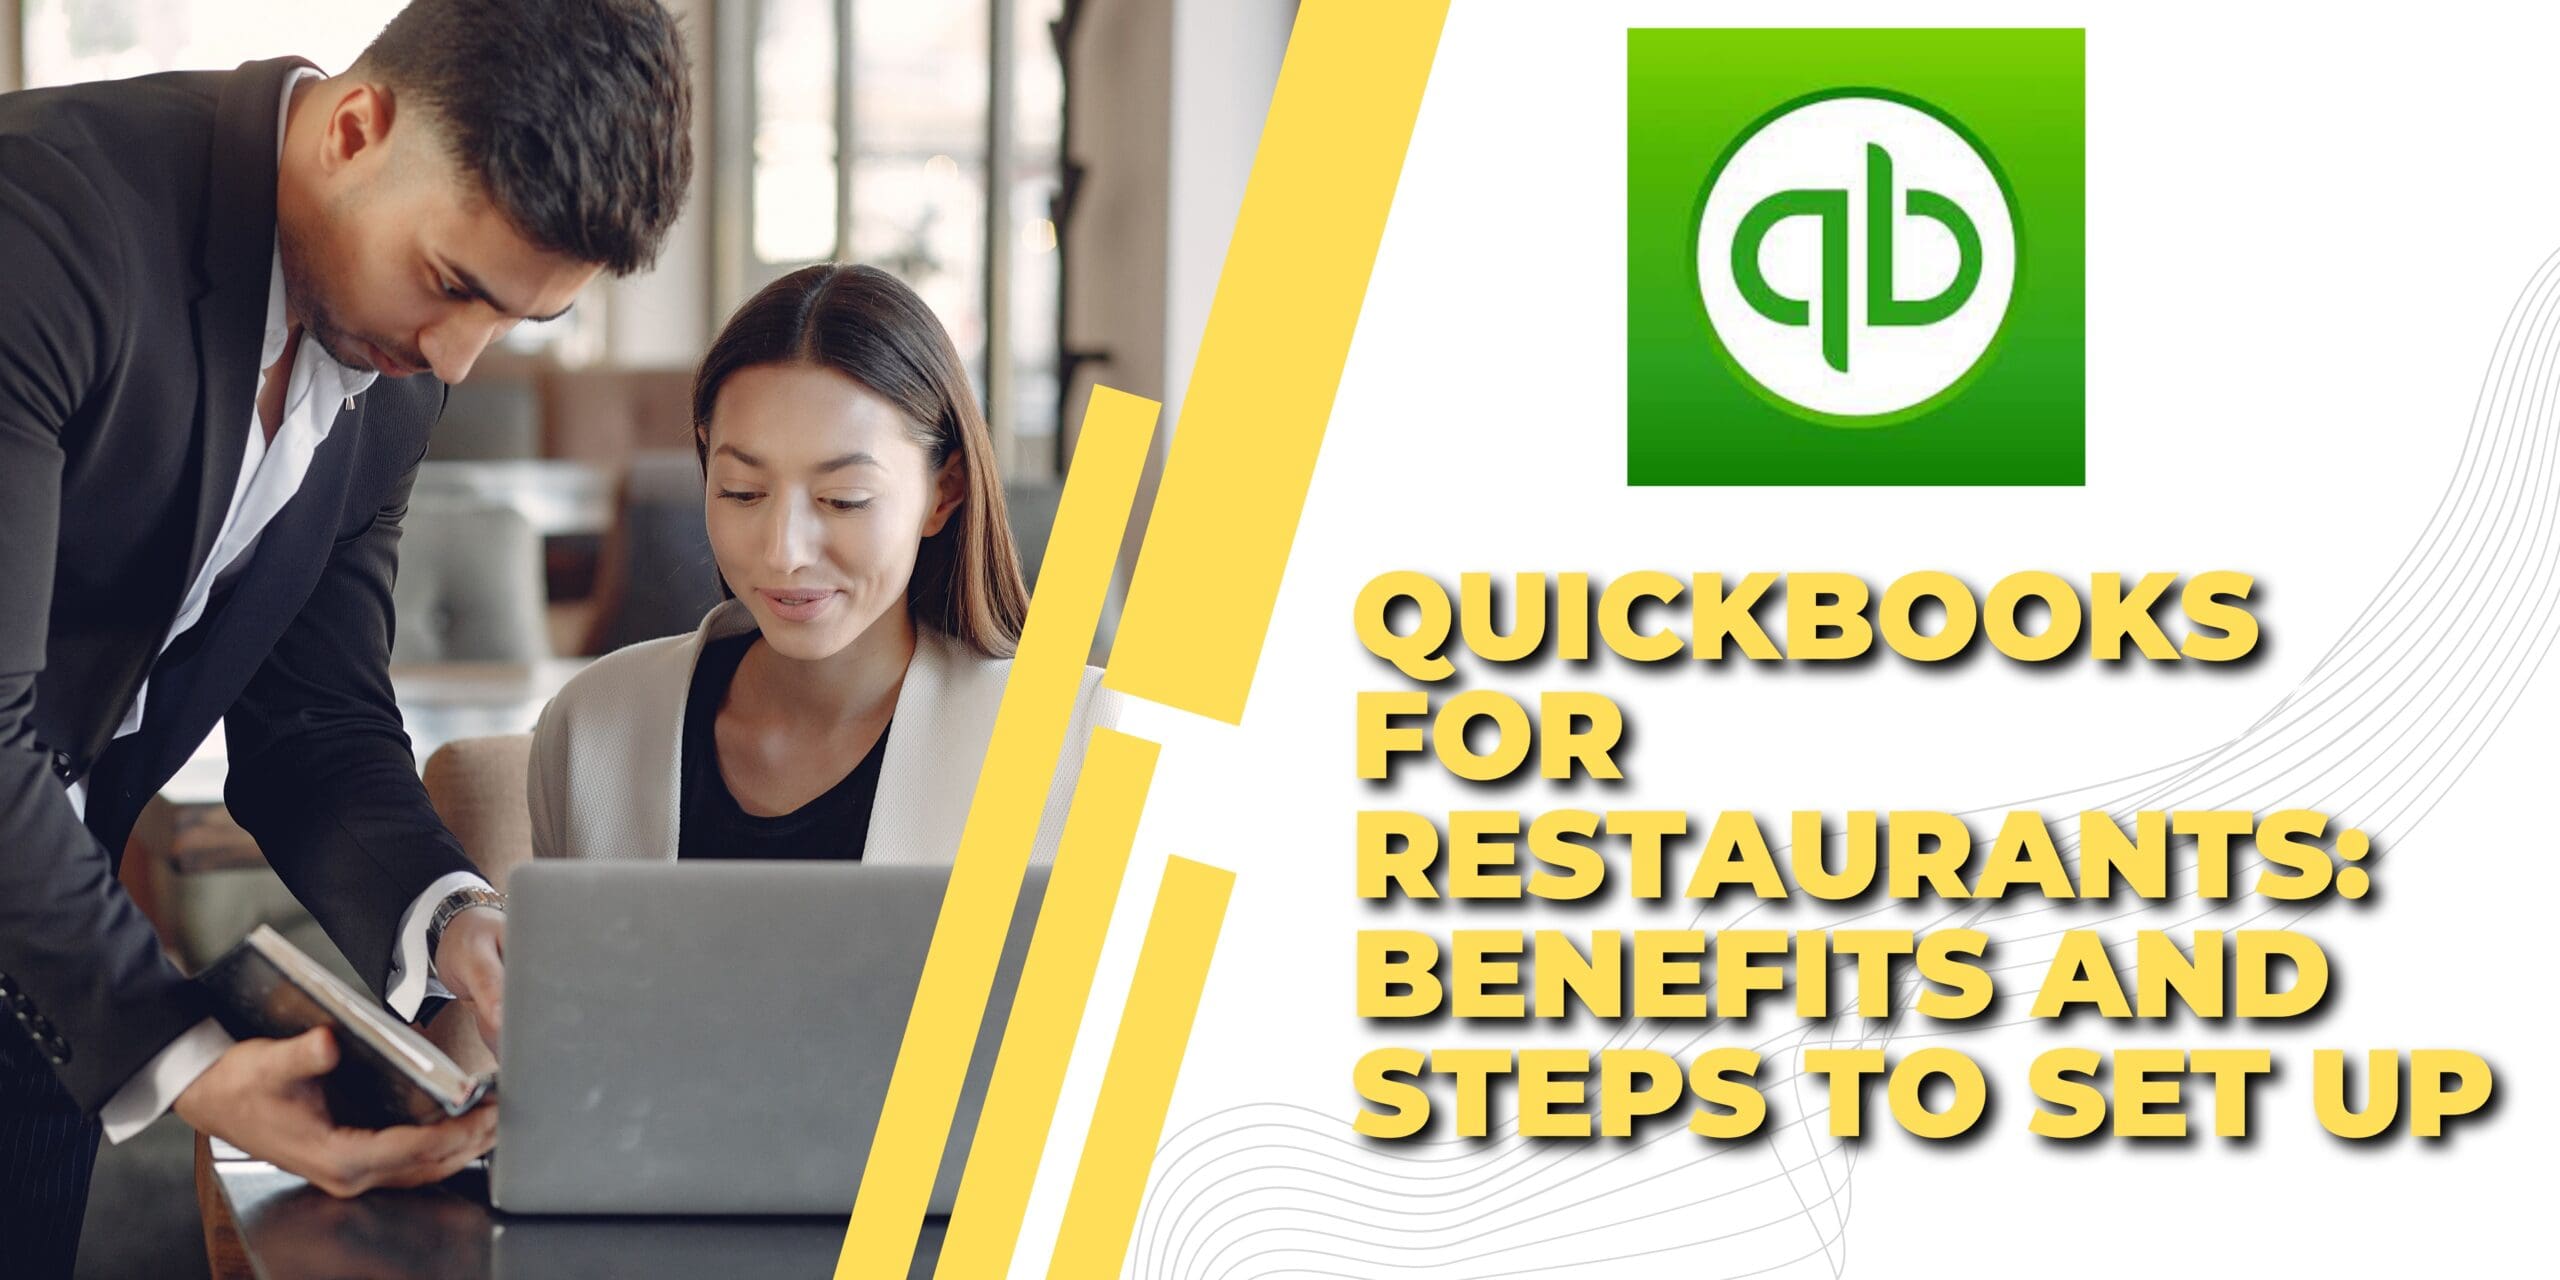 QuickBooks For Restaurants: Benefits And Steps to Set Up